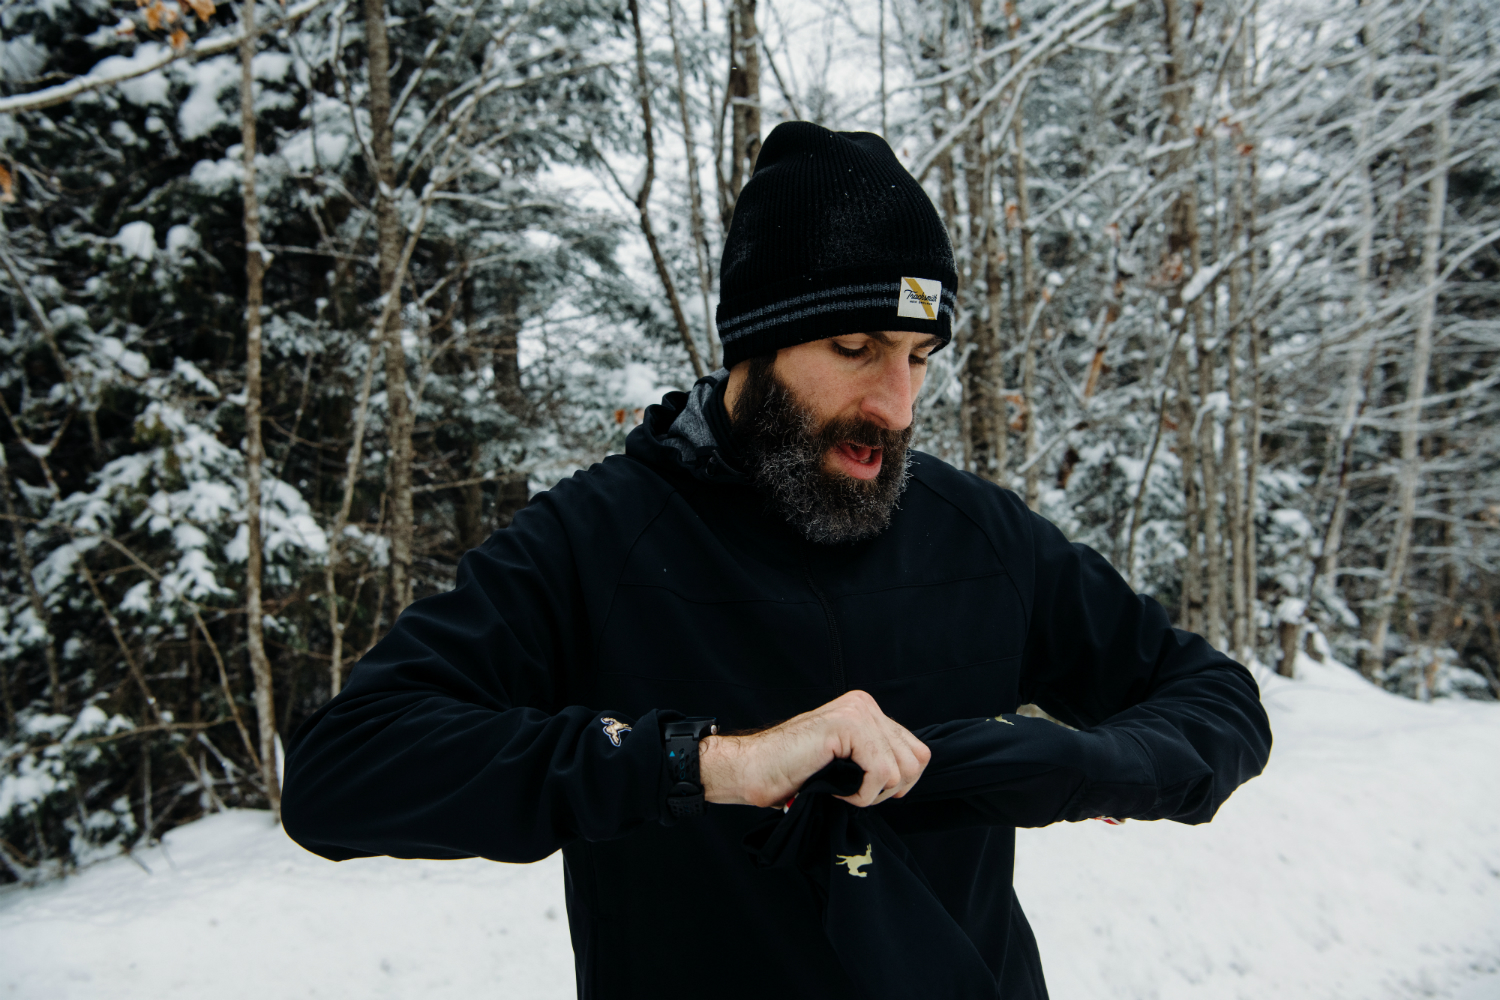 Tracksmith's 'No Days Off' Line Makes Running in Winter Warm - The